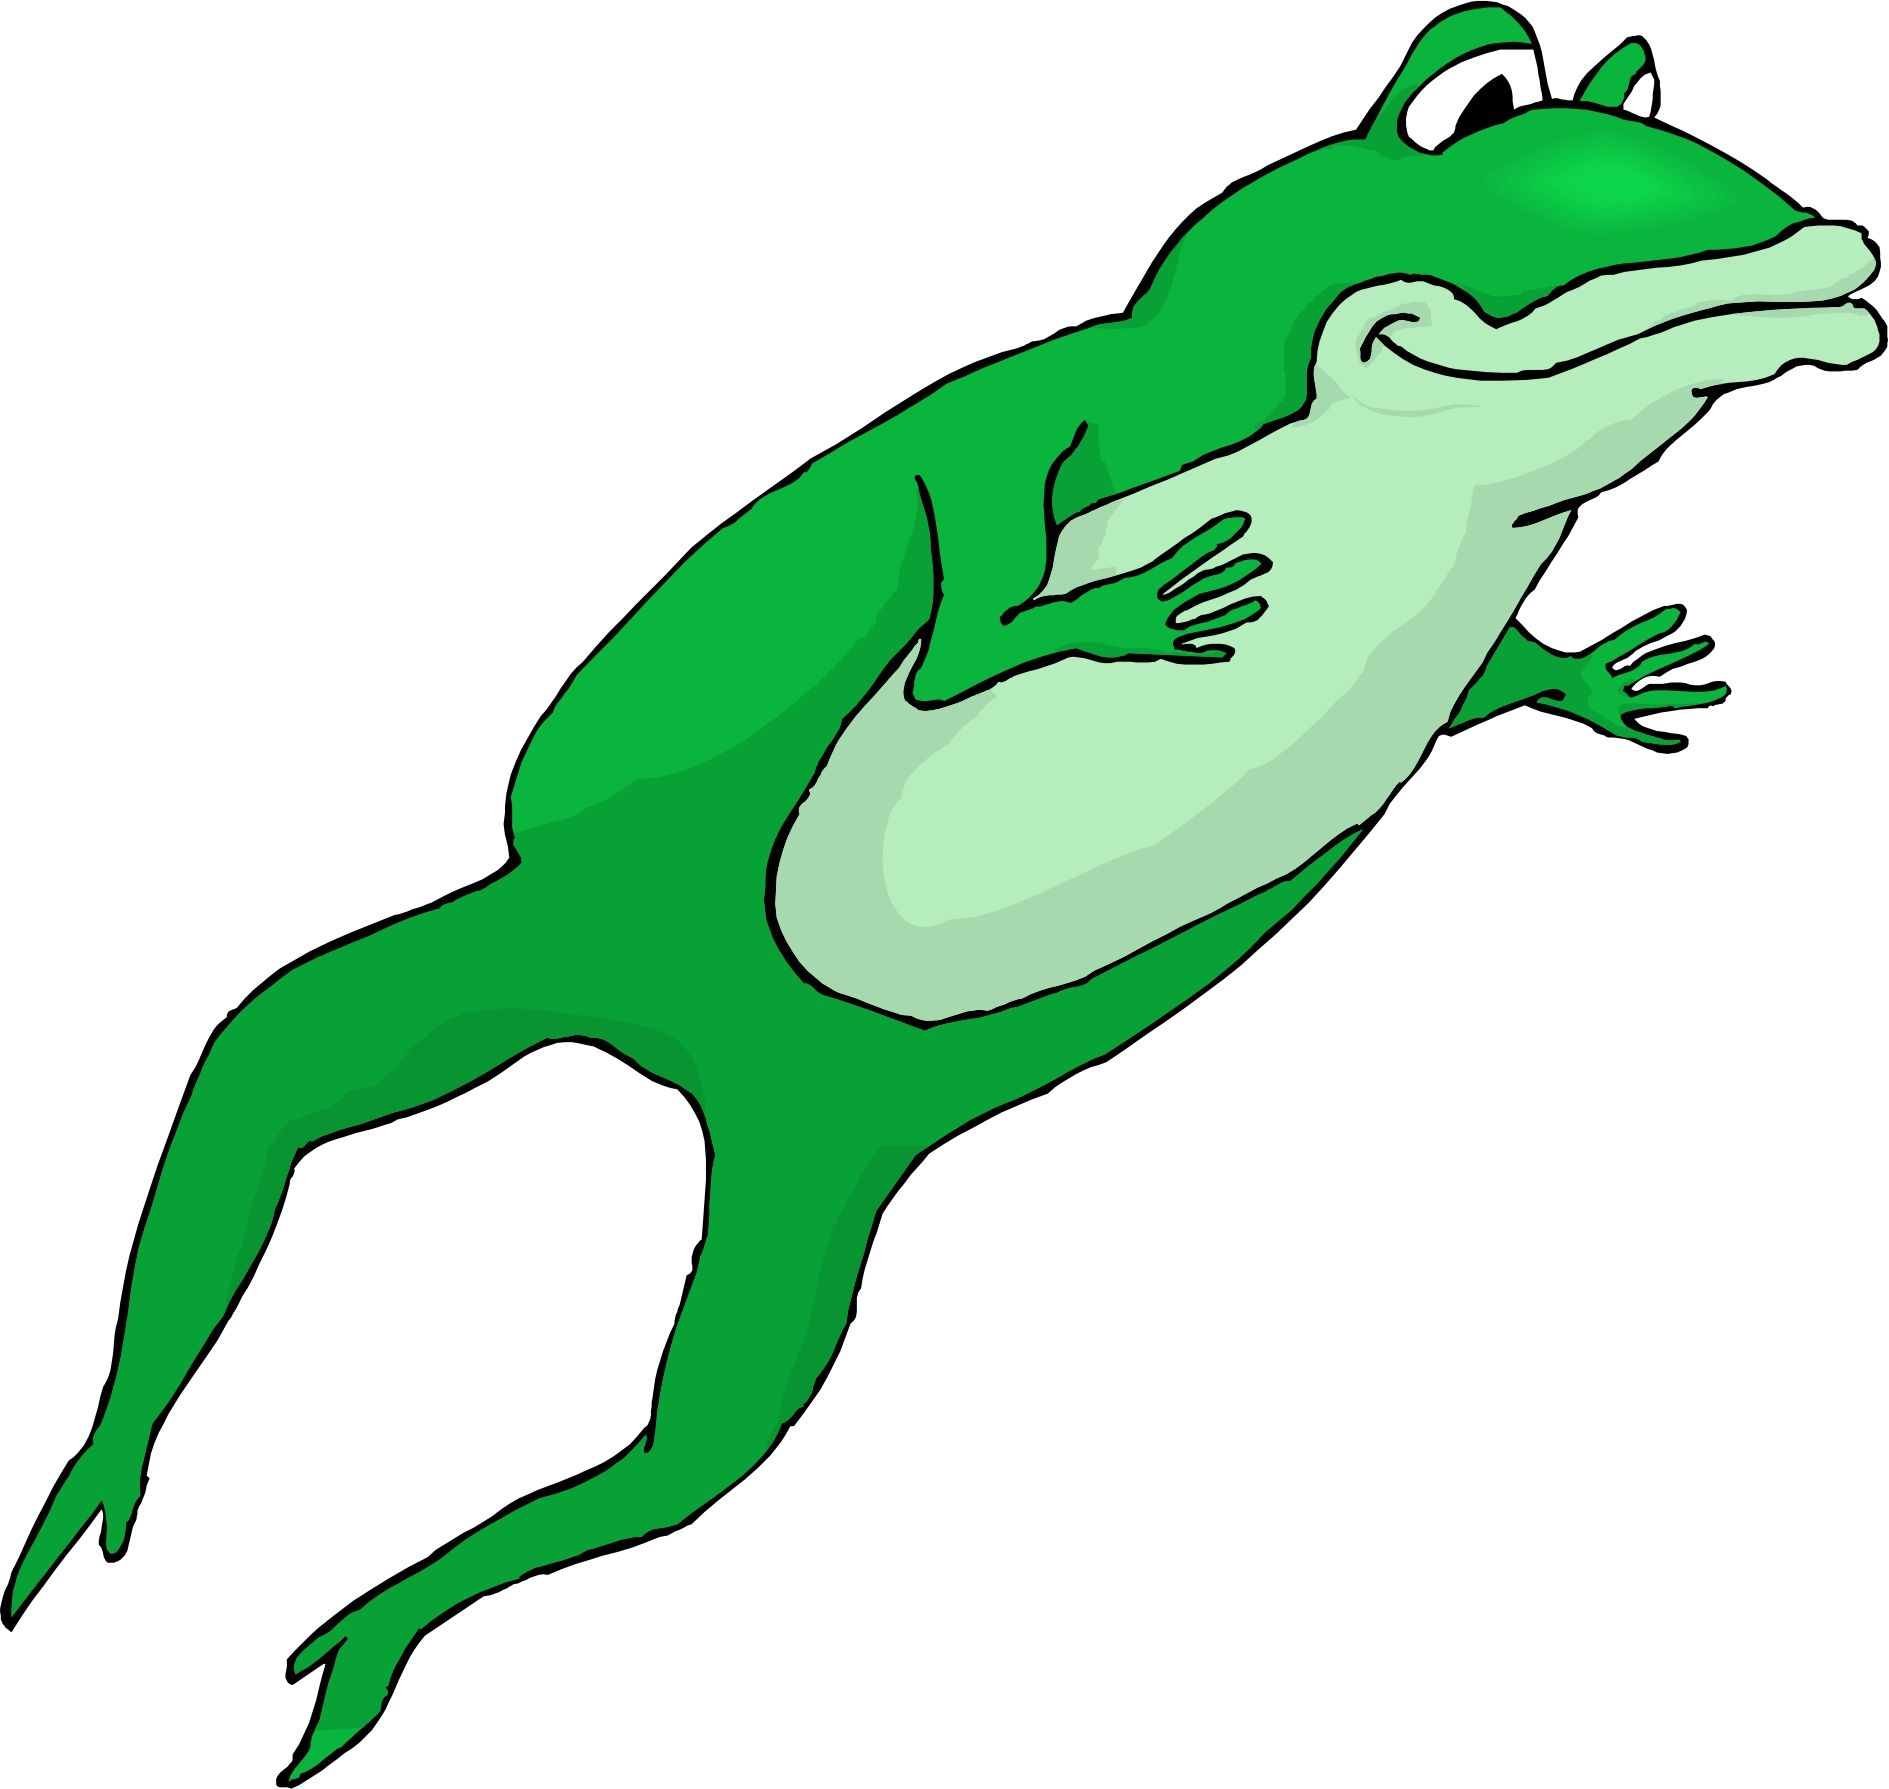 Image search leaping . Frog clipart cartoon